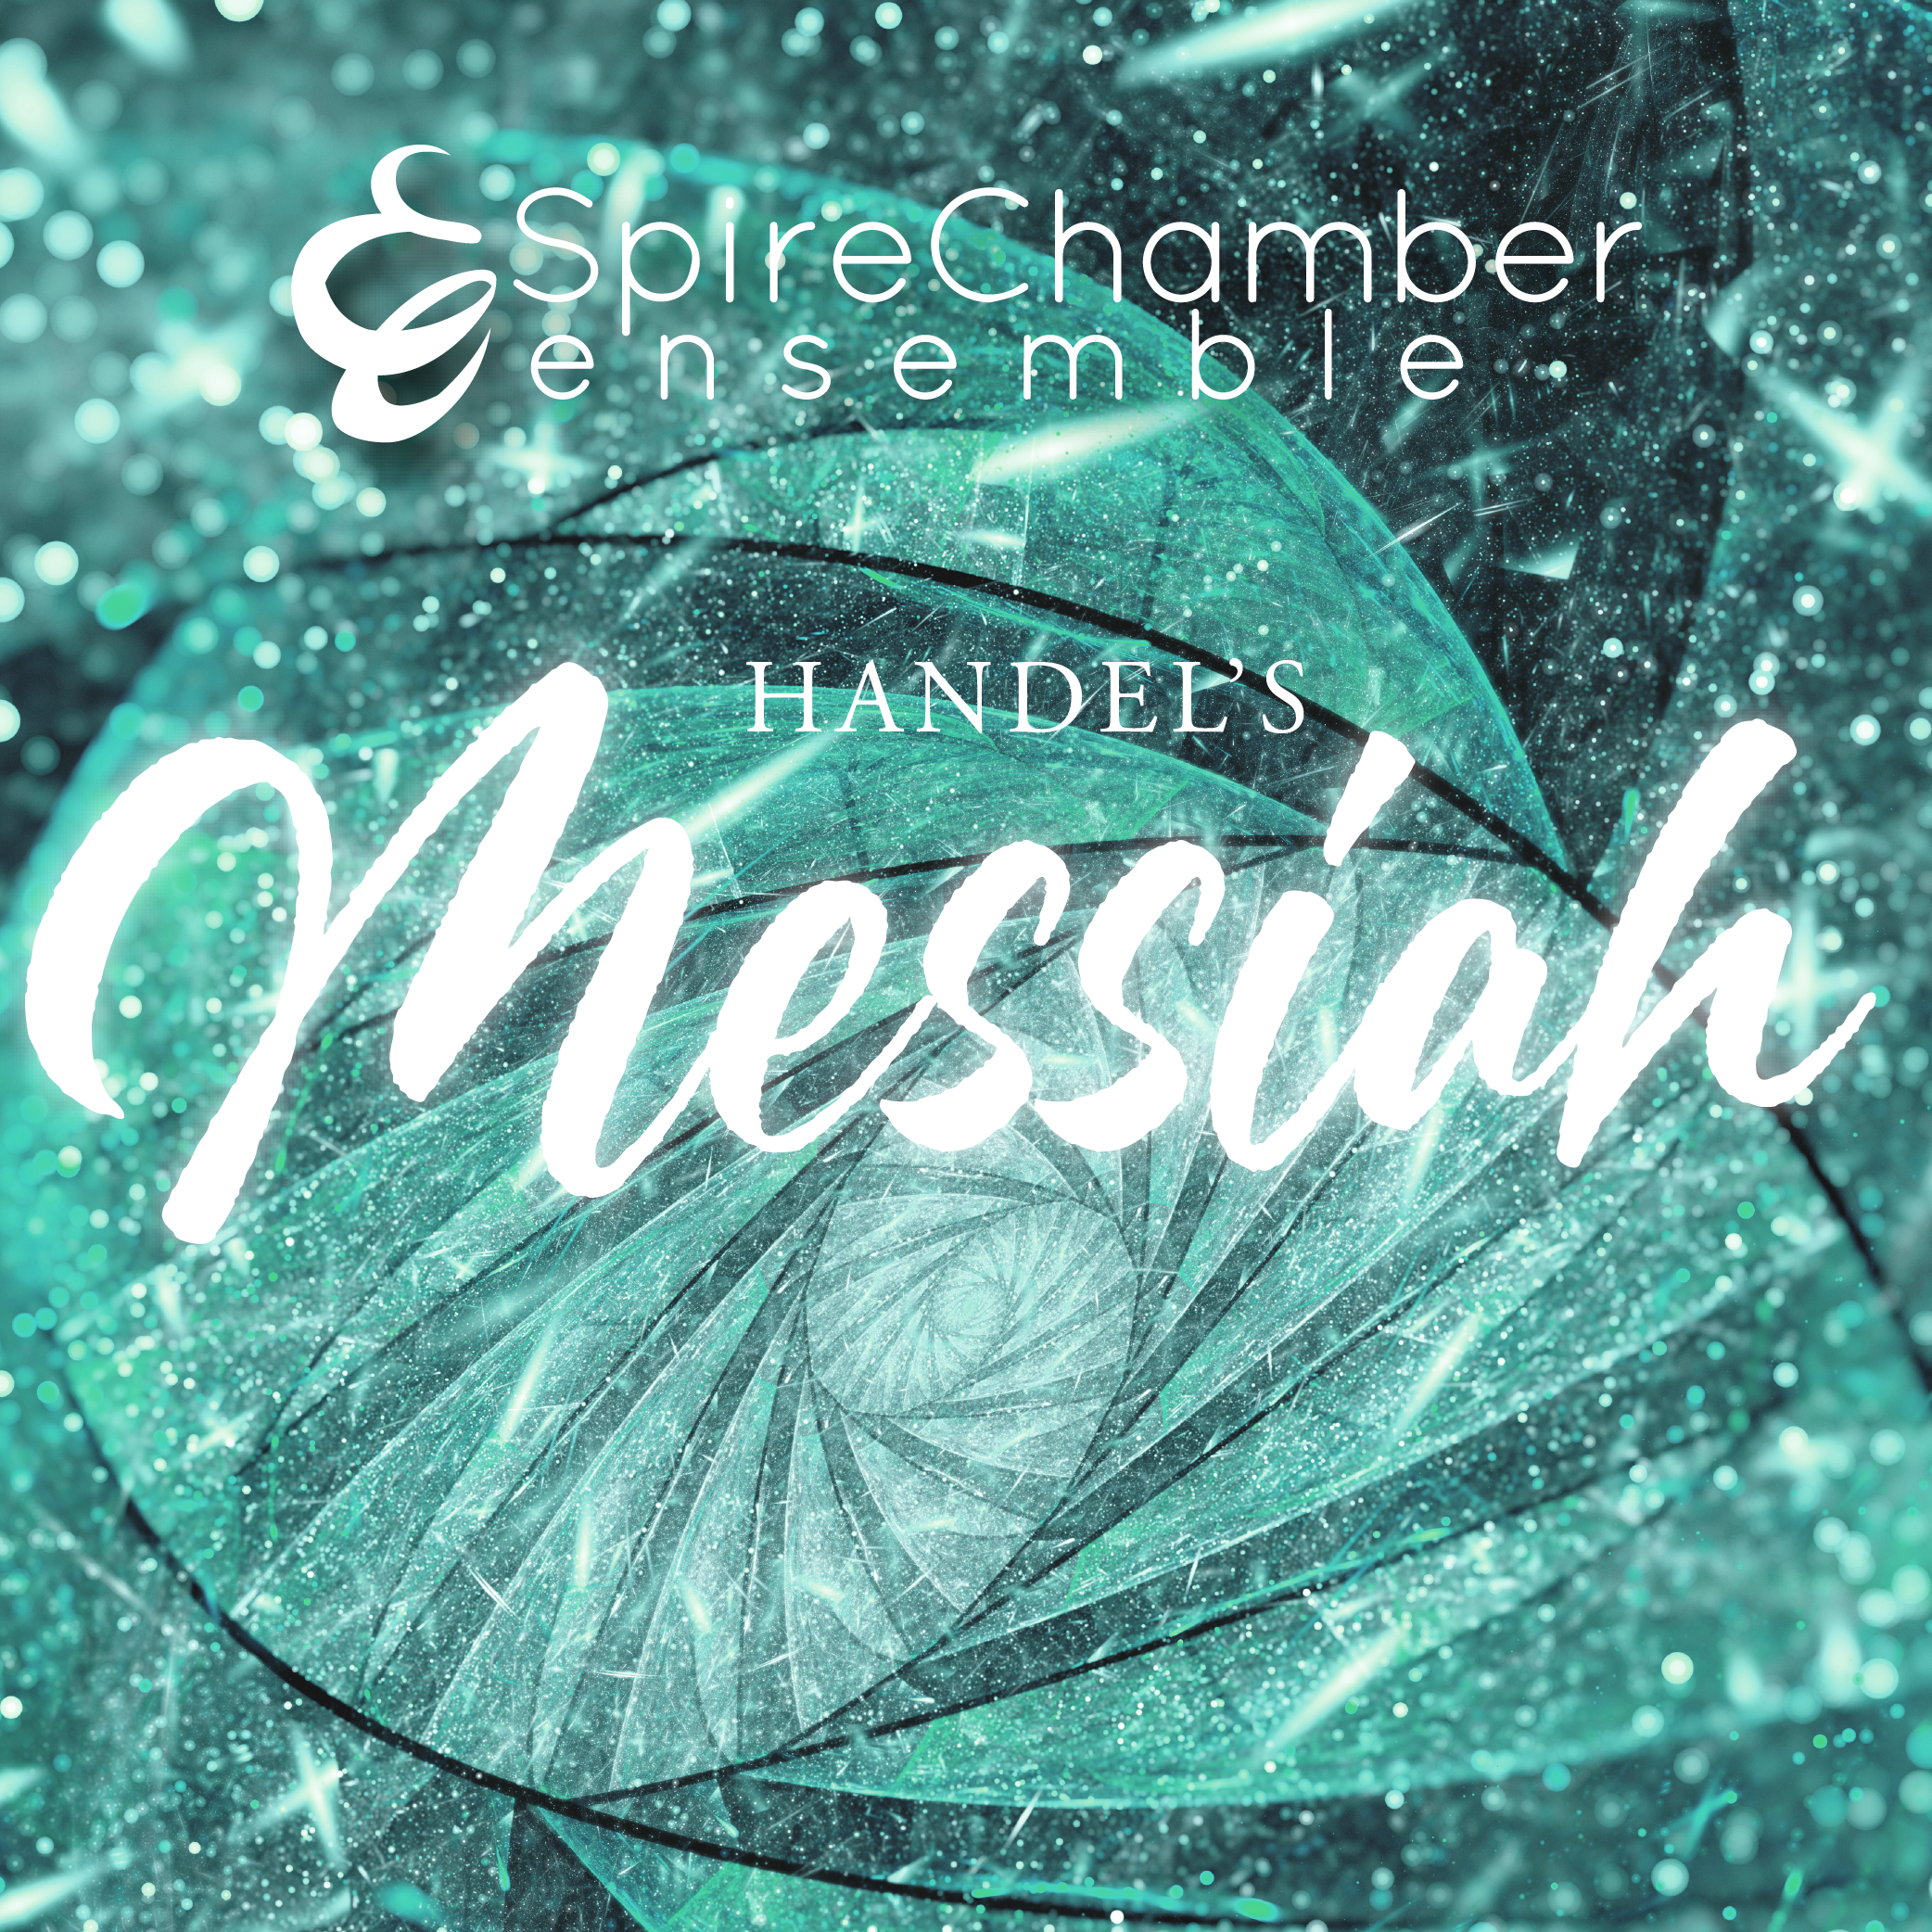 <em>Spire Chamber Ensemble and Baroque Orchestra Present</em><br>

Handel's <em>Messiah</em><br>

Period Performance with Soloists from the Choir